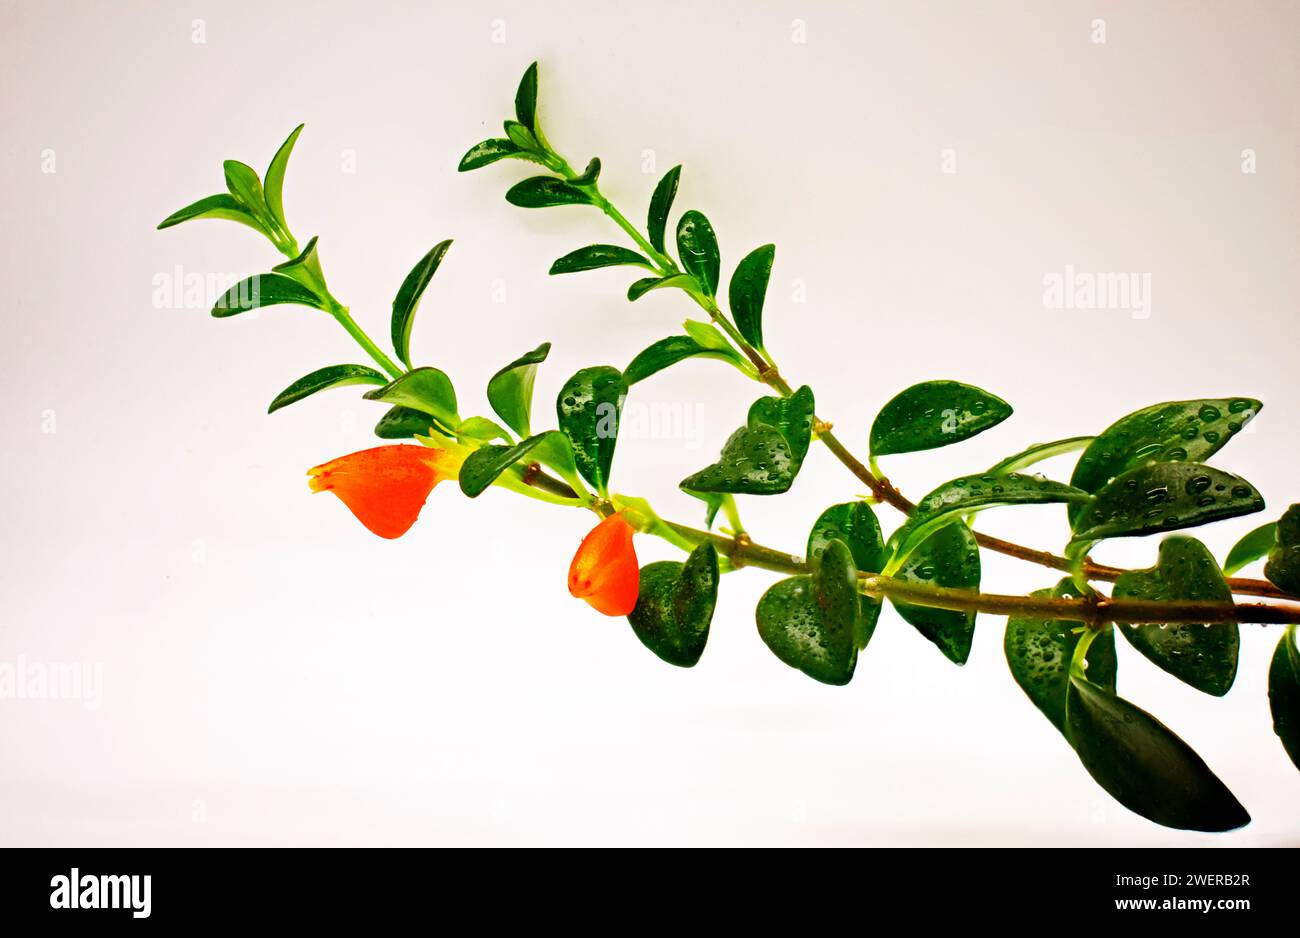 Focus stacked image of goldfish plant (Nematanthus Gregarius) branch, with red flowers, dark green leaves, and stems, on an ivory background Stock Photo